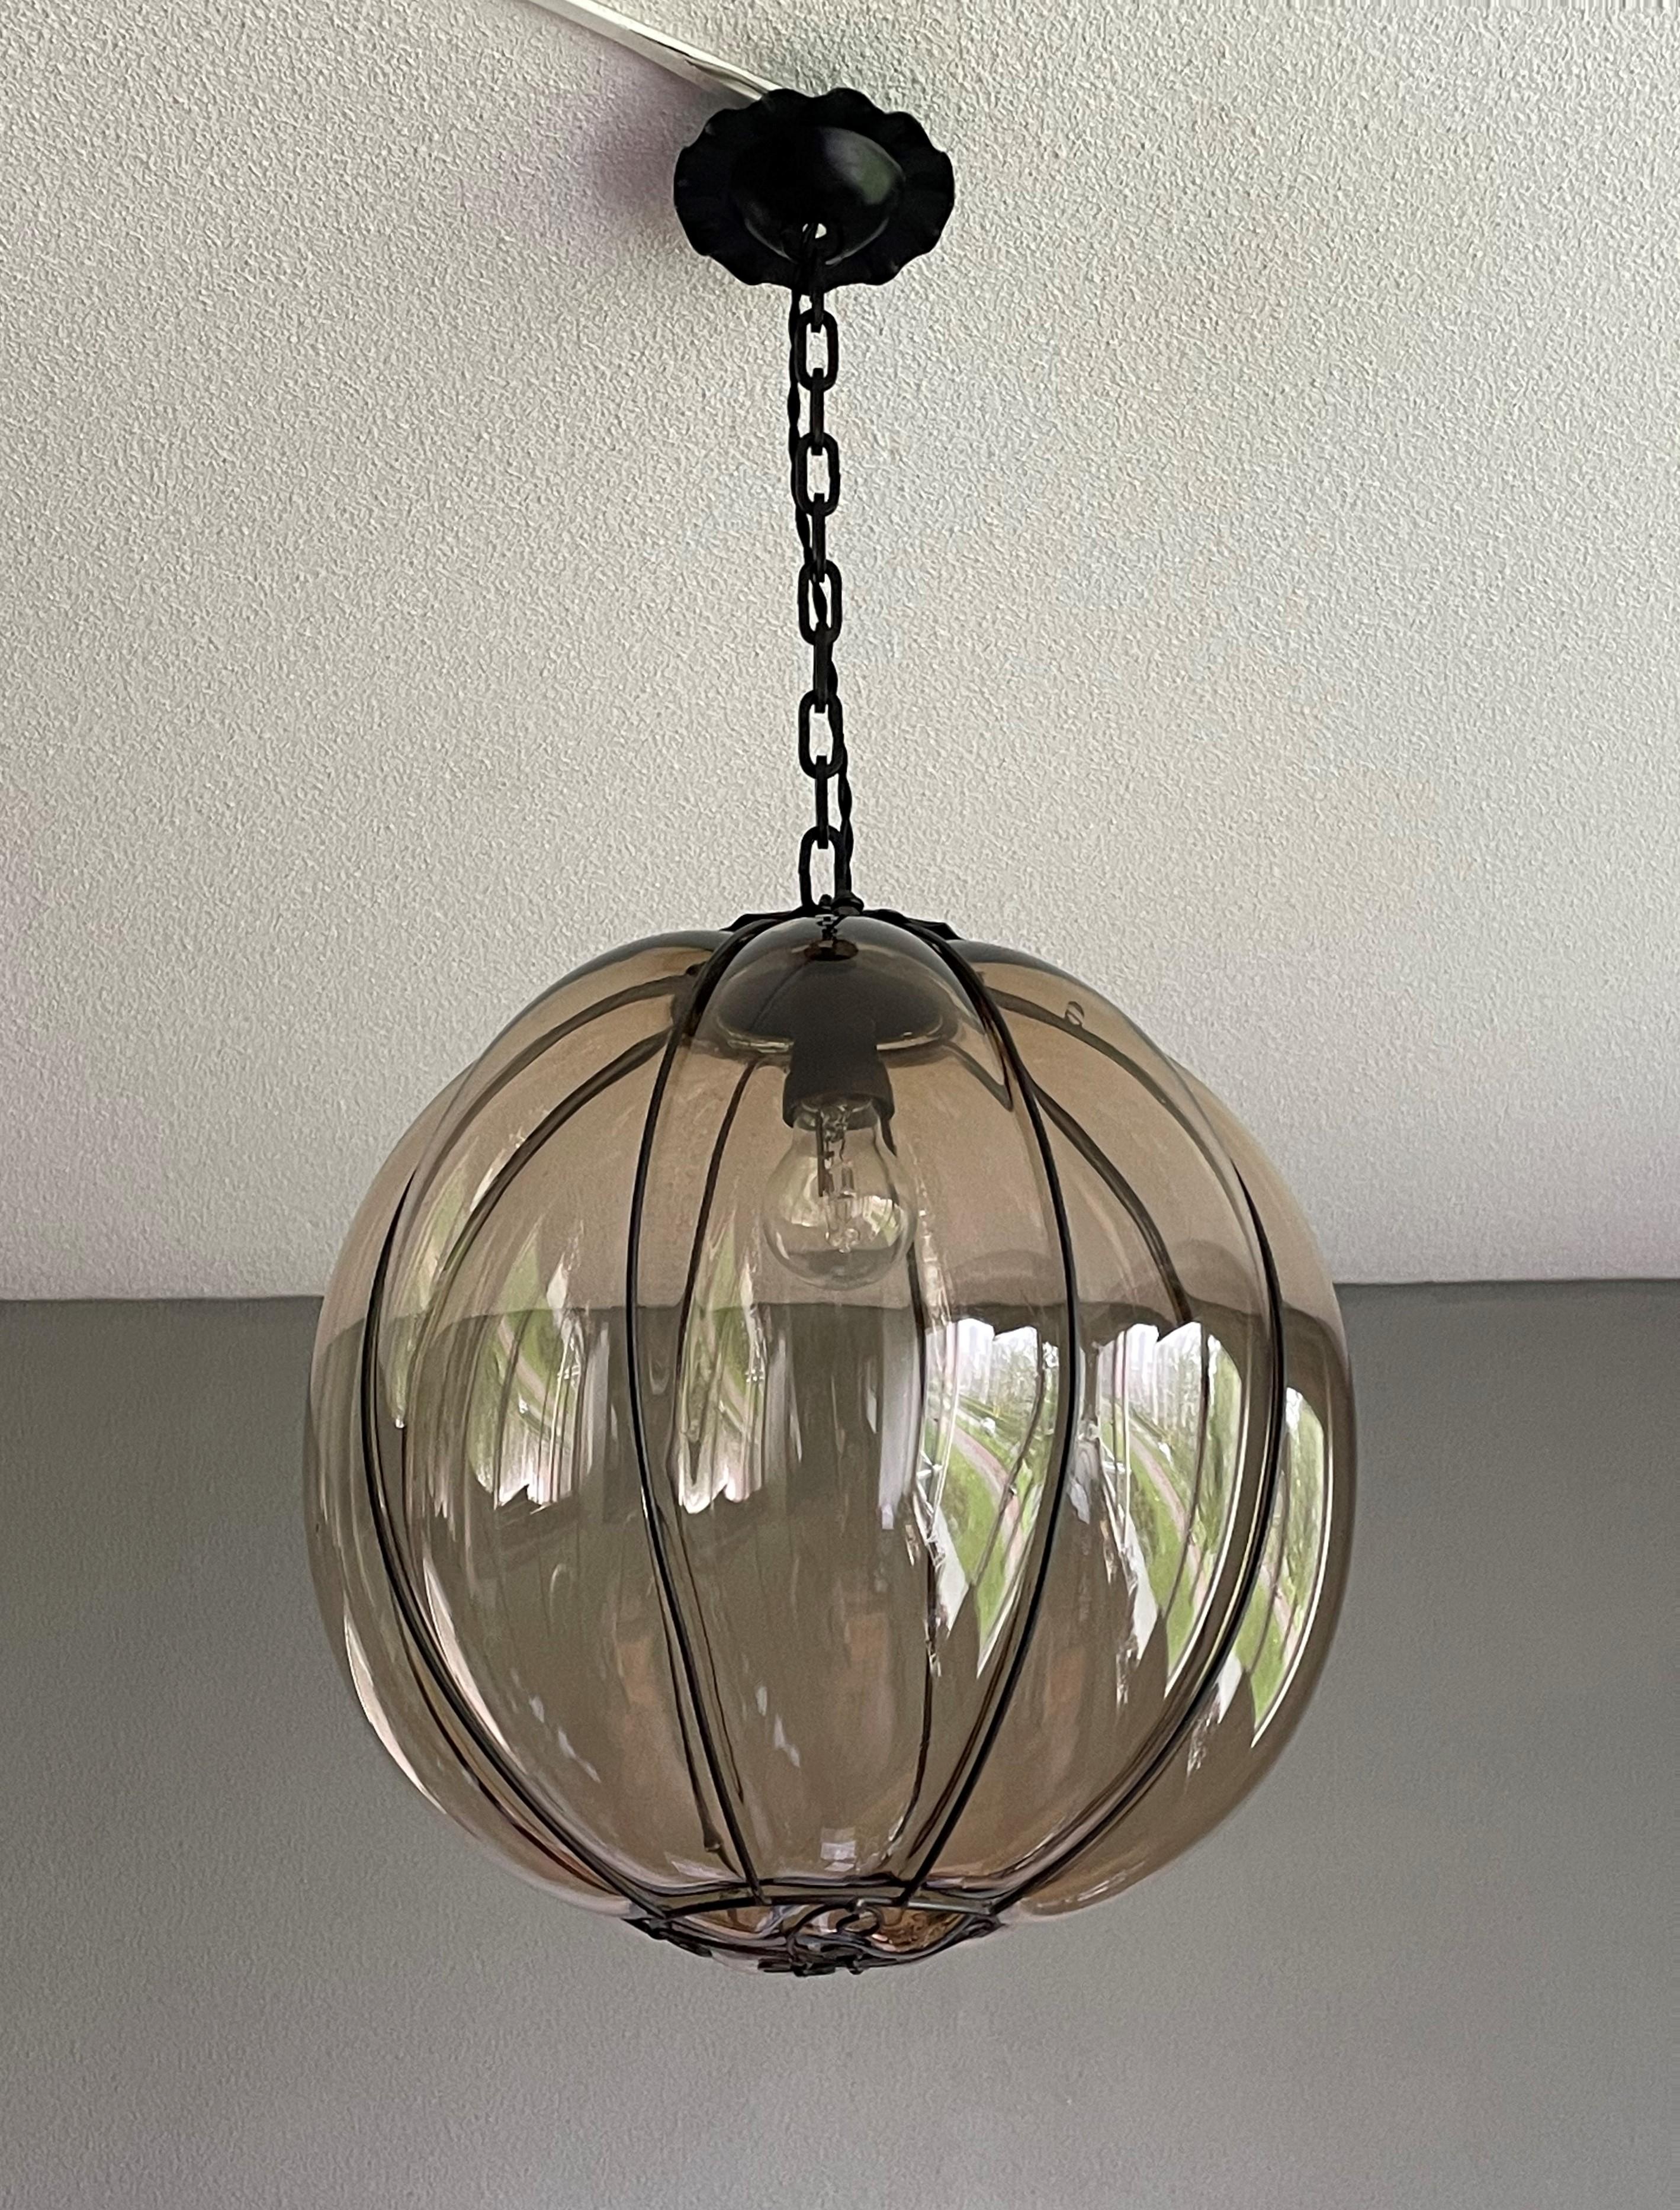 Rare Midcentury Venetian Mouth Blown Glass in Iron Frame Pendant / Chandelier For Sale 6